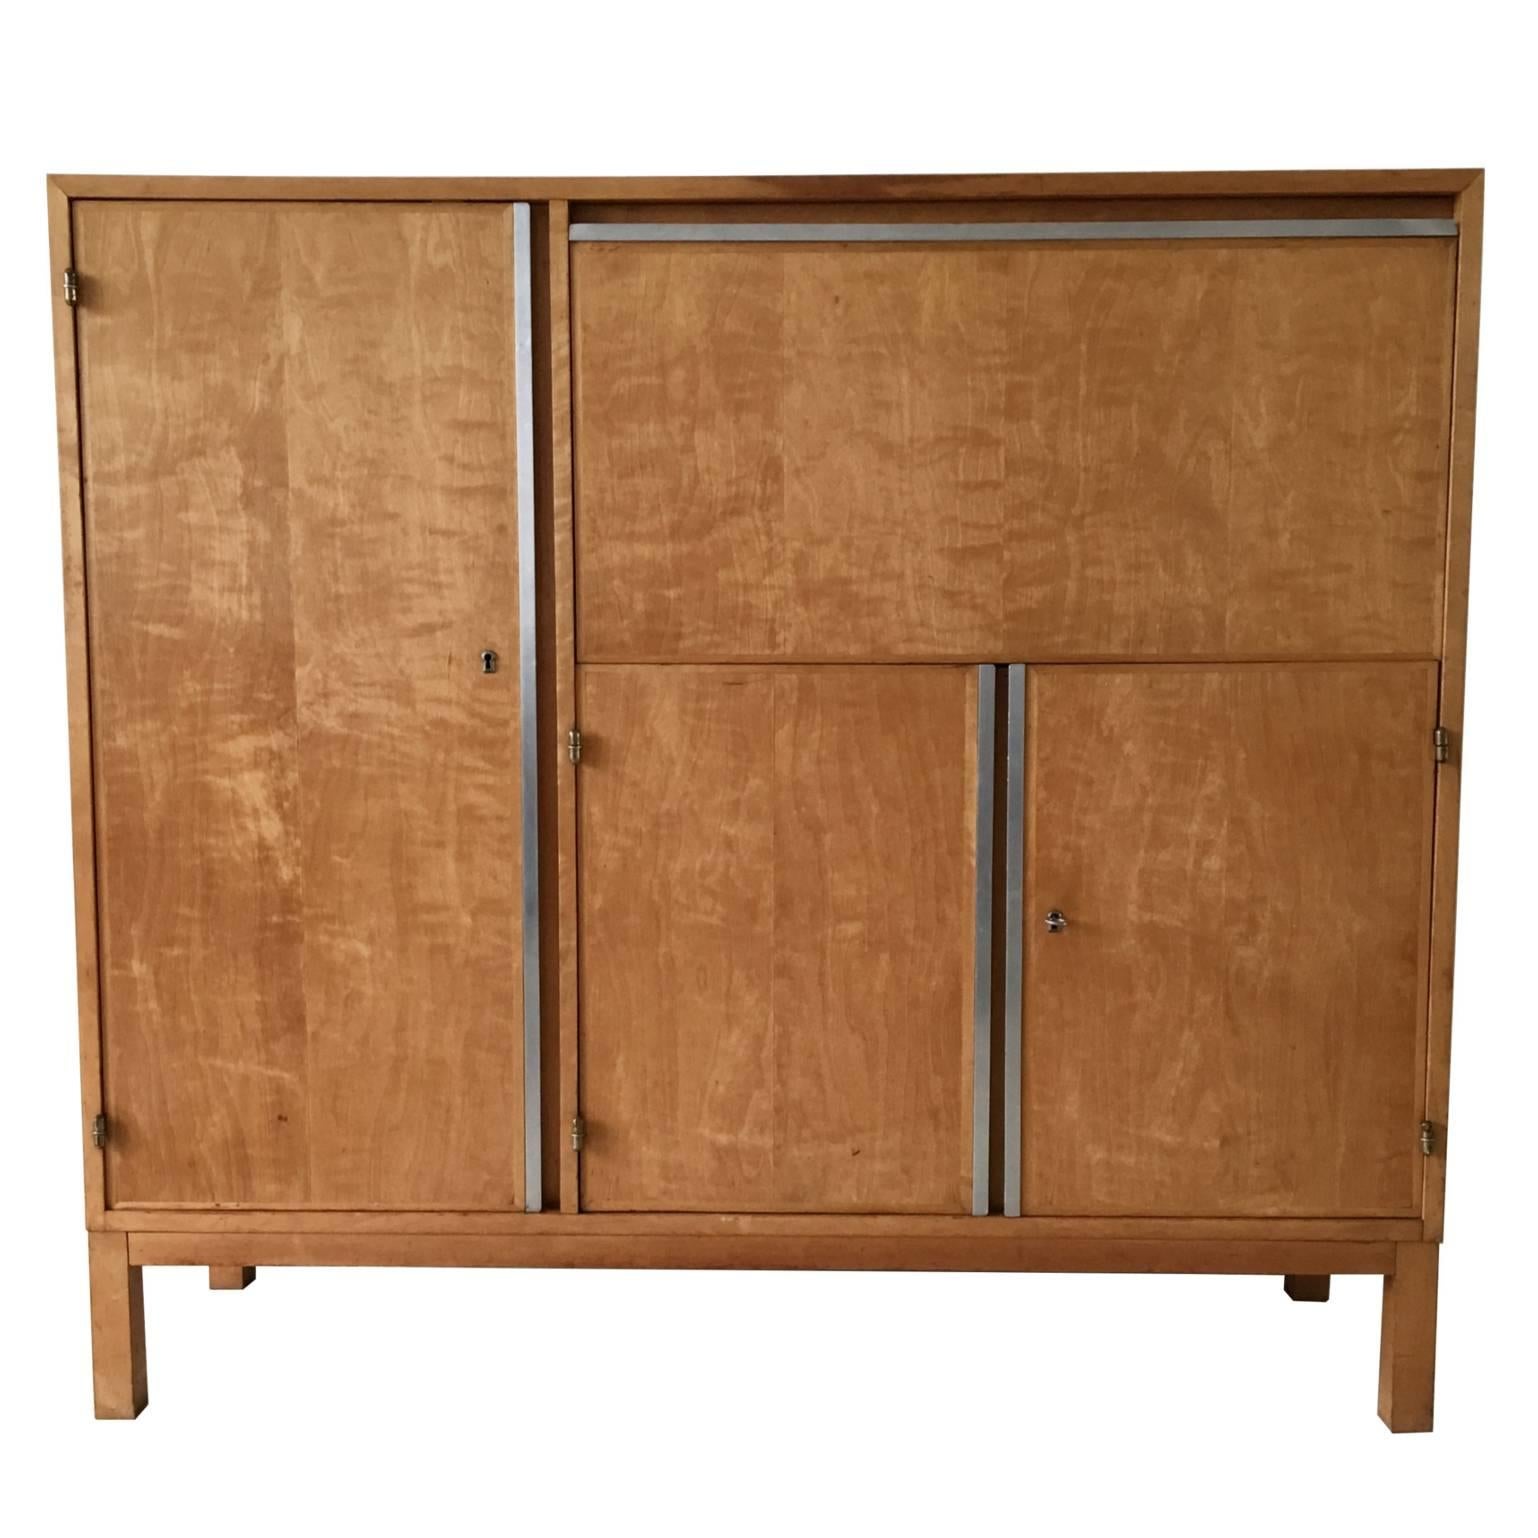 Dutch Design Cabinet Attributed to Cees Braakman for UMS Pastoe, 1950s